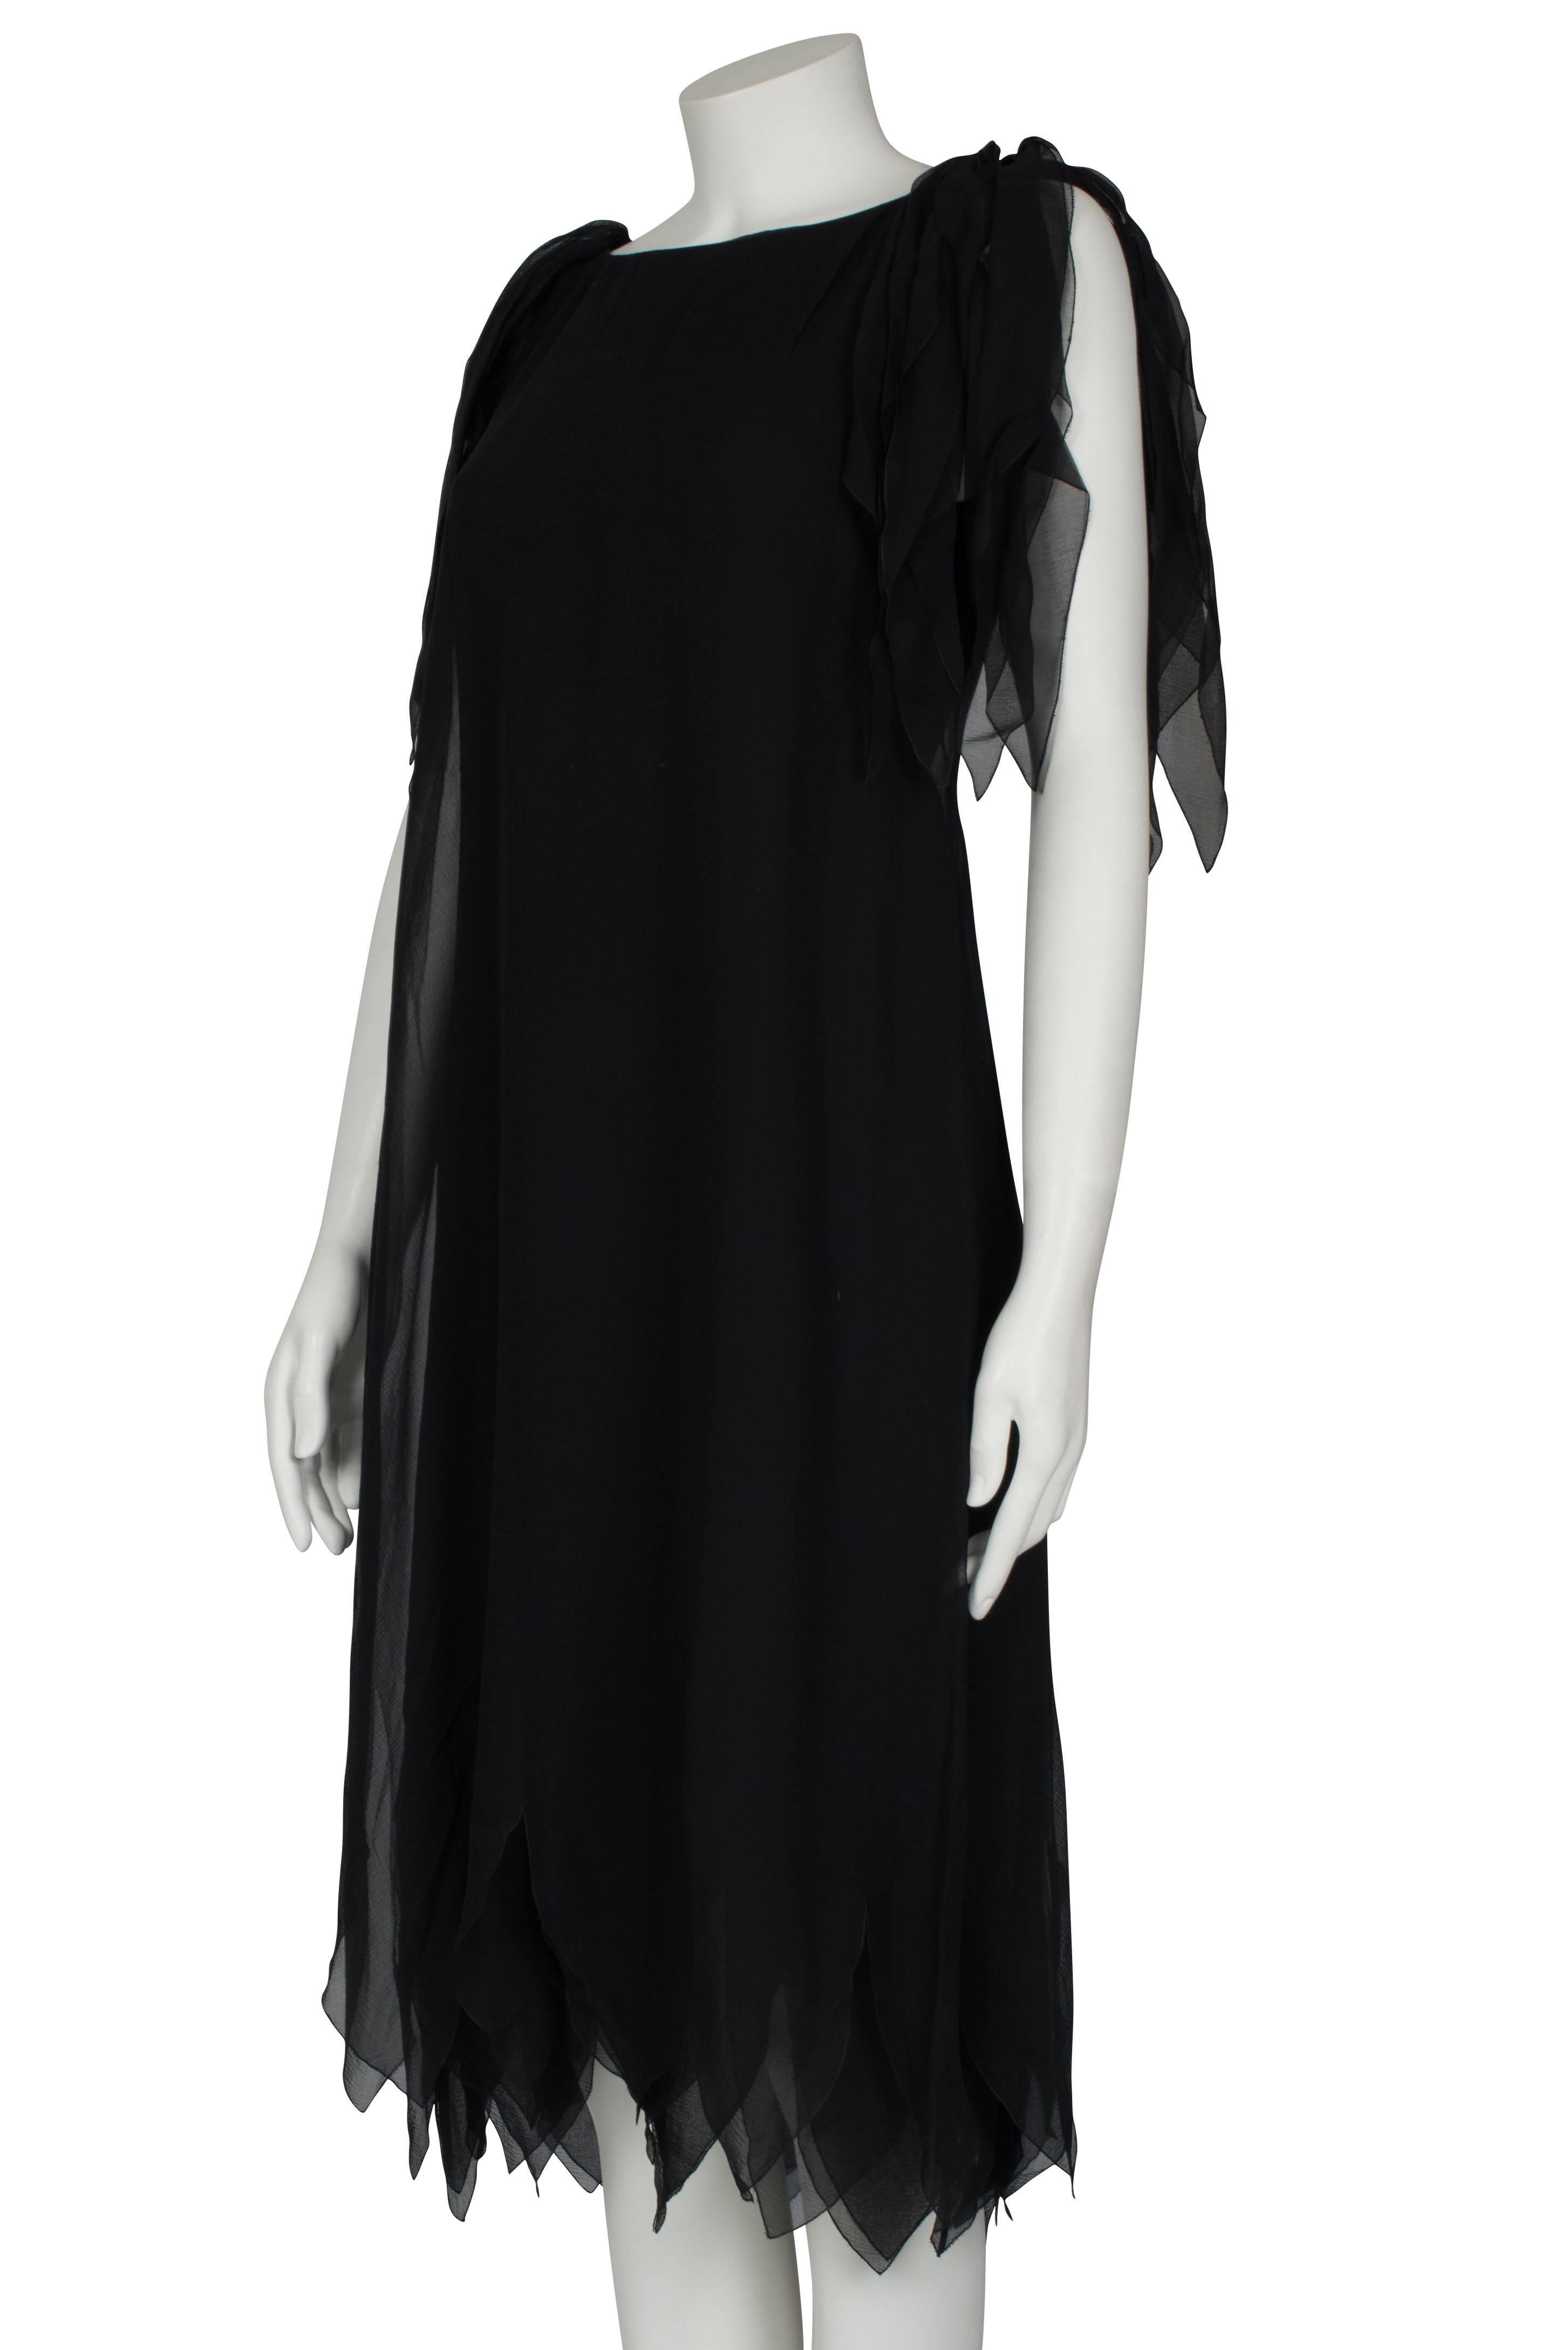 Christian Dior Couture Black Chiffon Shift Dress Spring/Summer 1980 For Sale 3